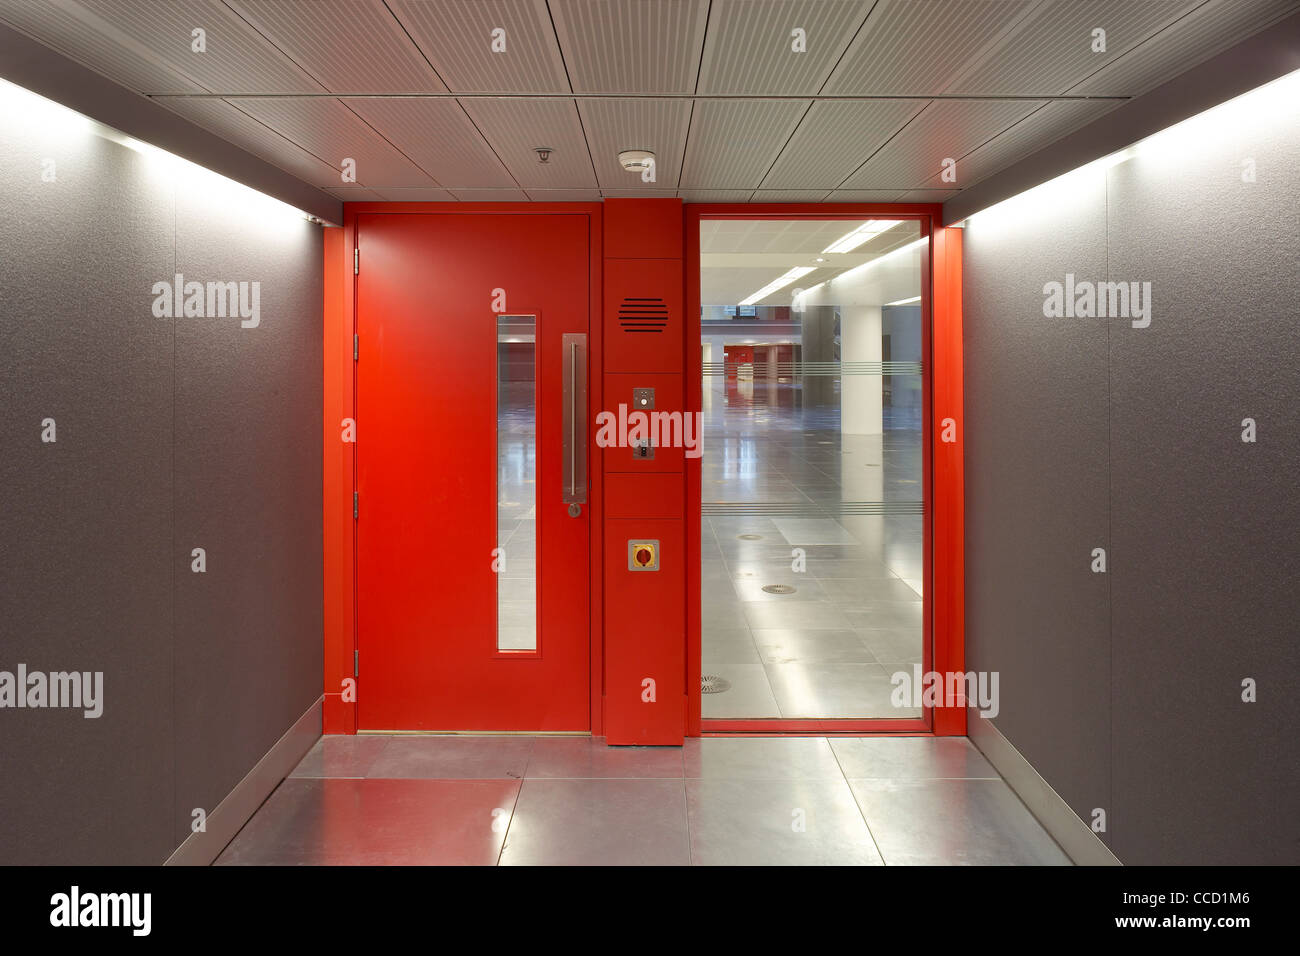 BBC BROADCASTING HOUSE - PHASE 2, ID:SR/SHEPPARD ROBSON, LONDON, 2010, RED DOOR Stock Photo